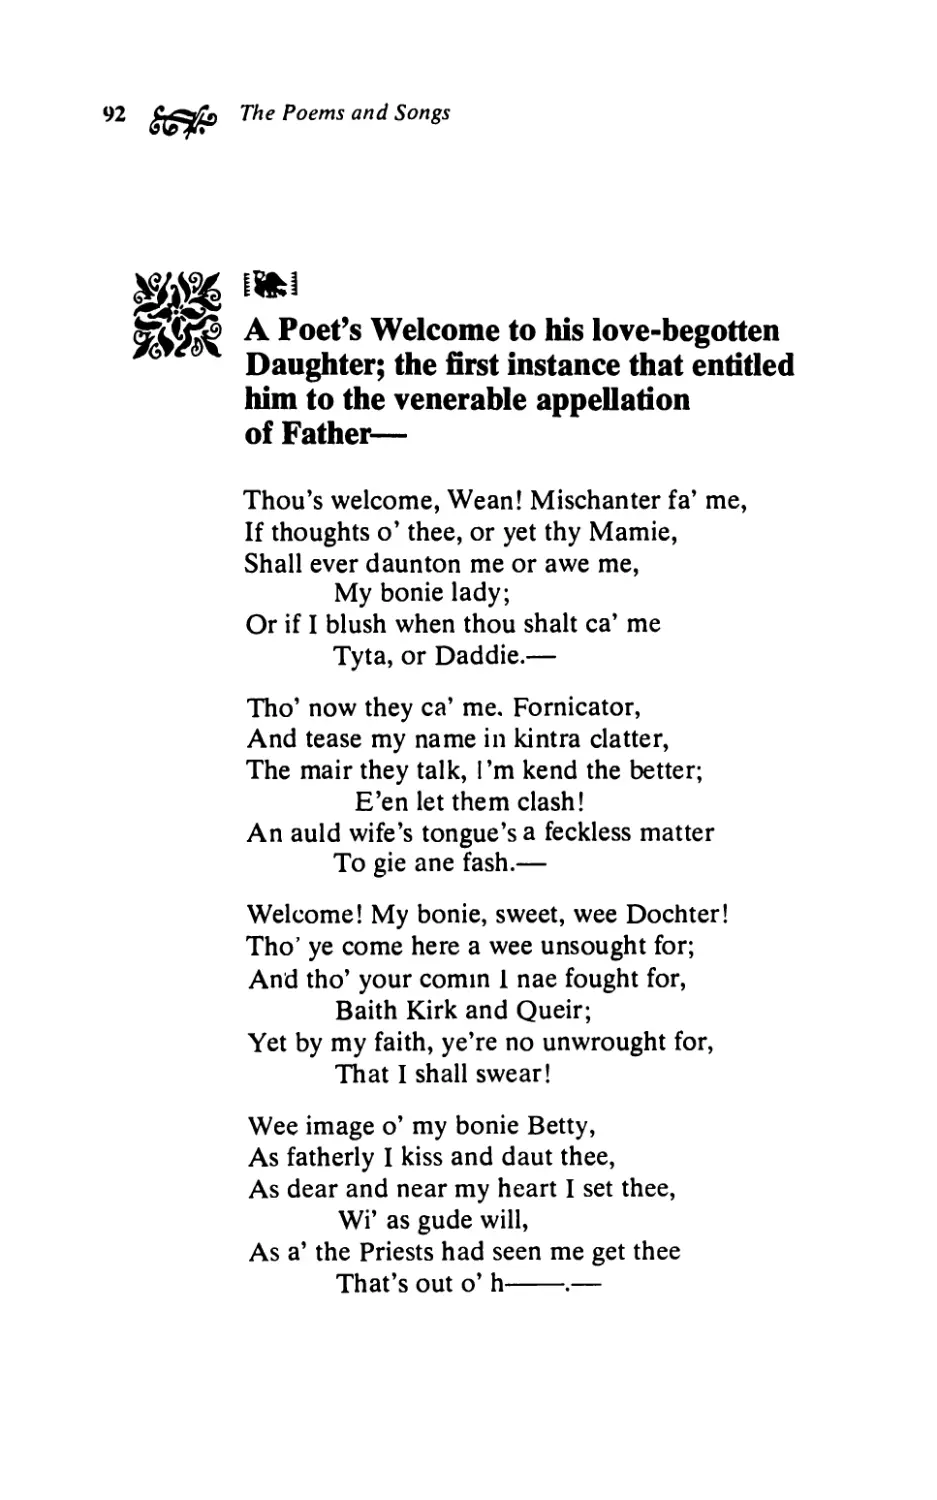 A Poet’s Welcome to his love-begotten Daughter